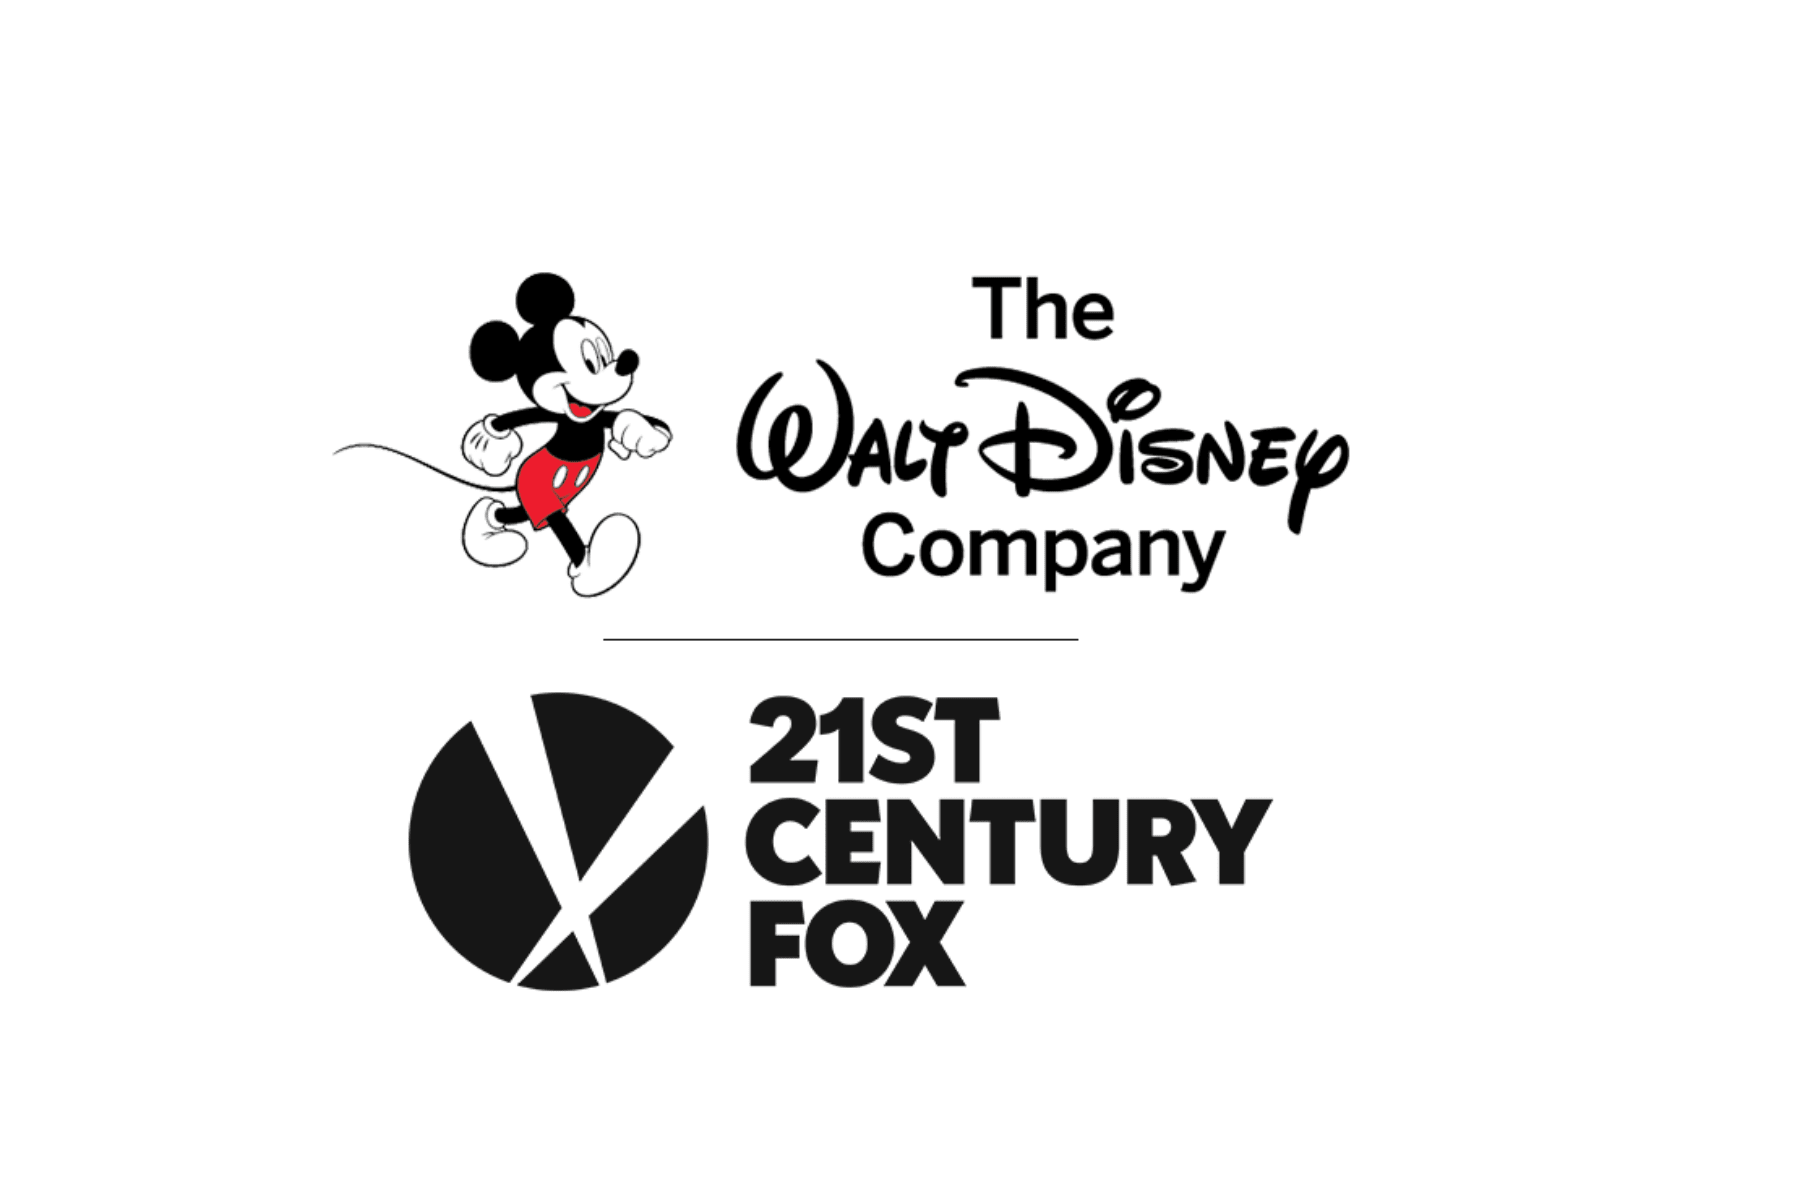 What Does The Disney-Fox Merger Mean For The Industry And Individual Consumers? 